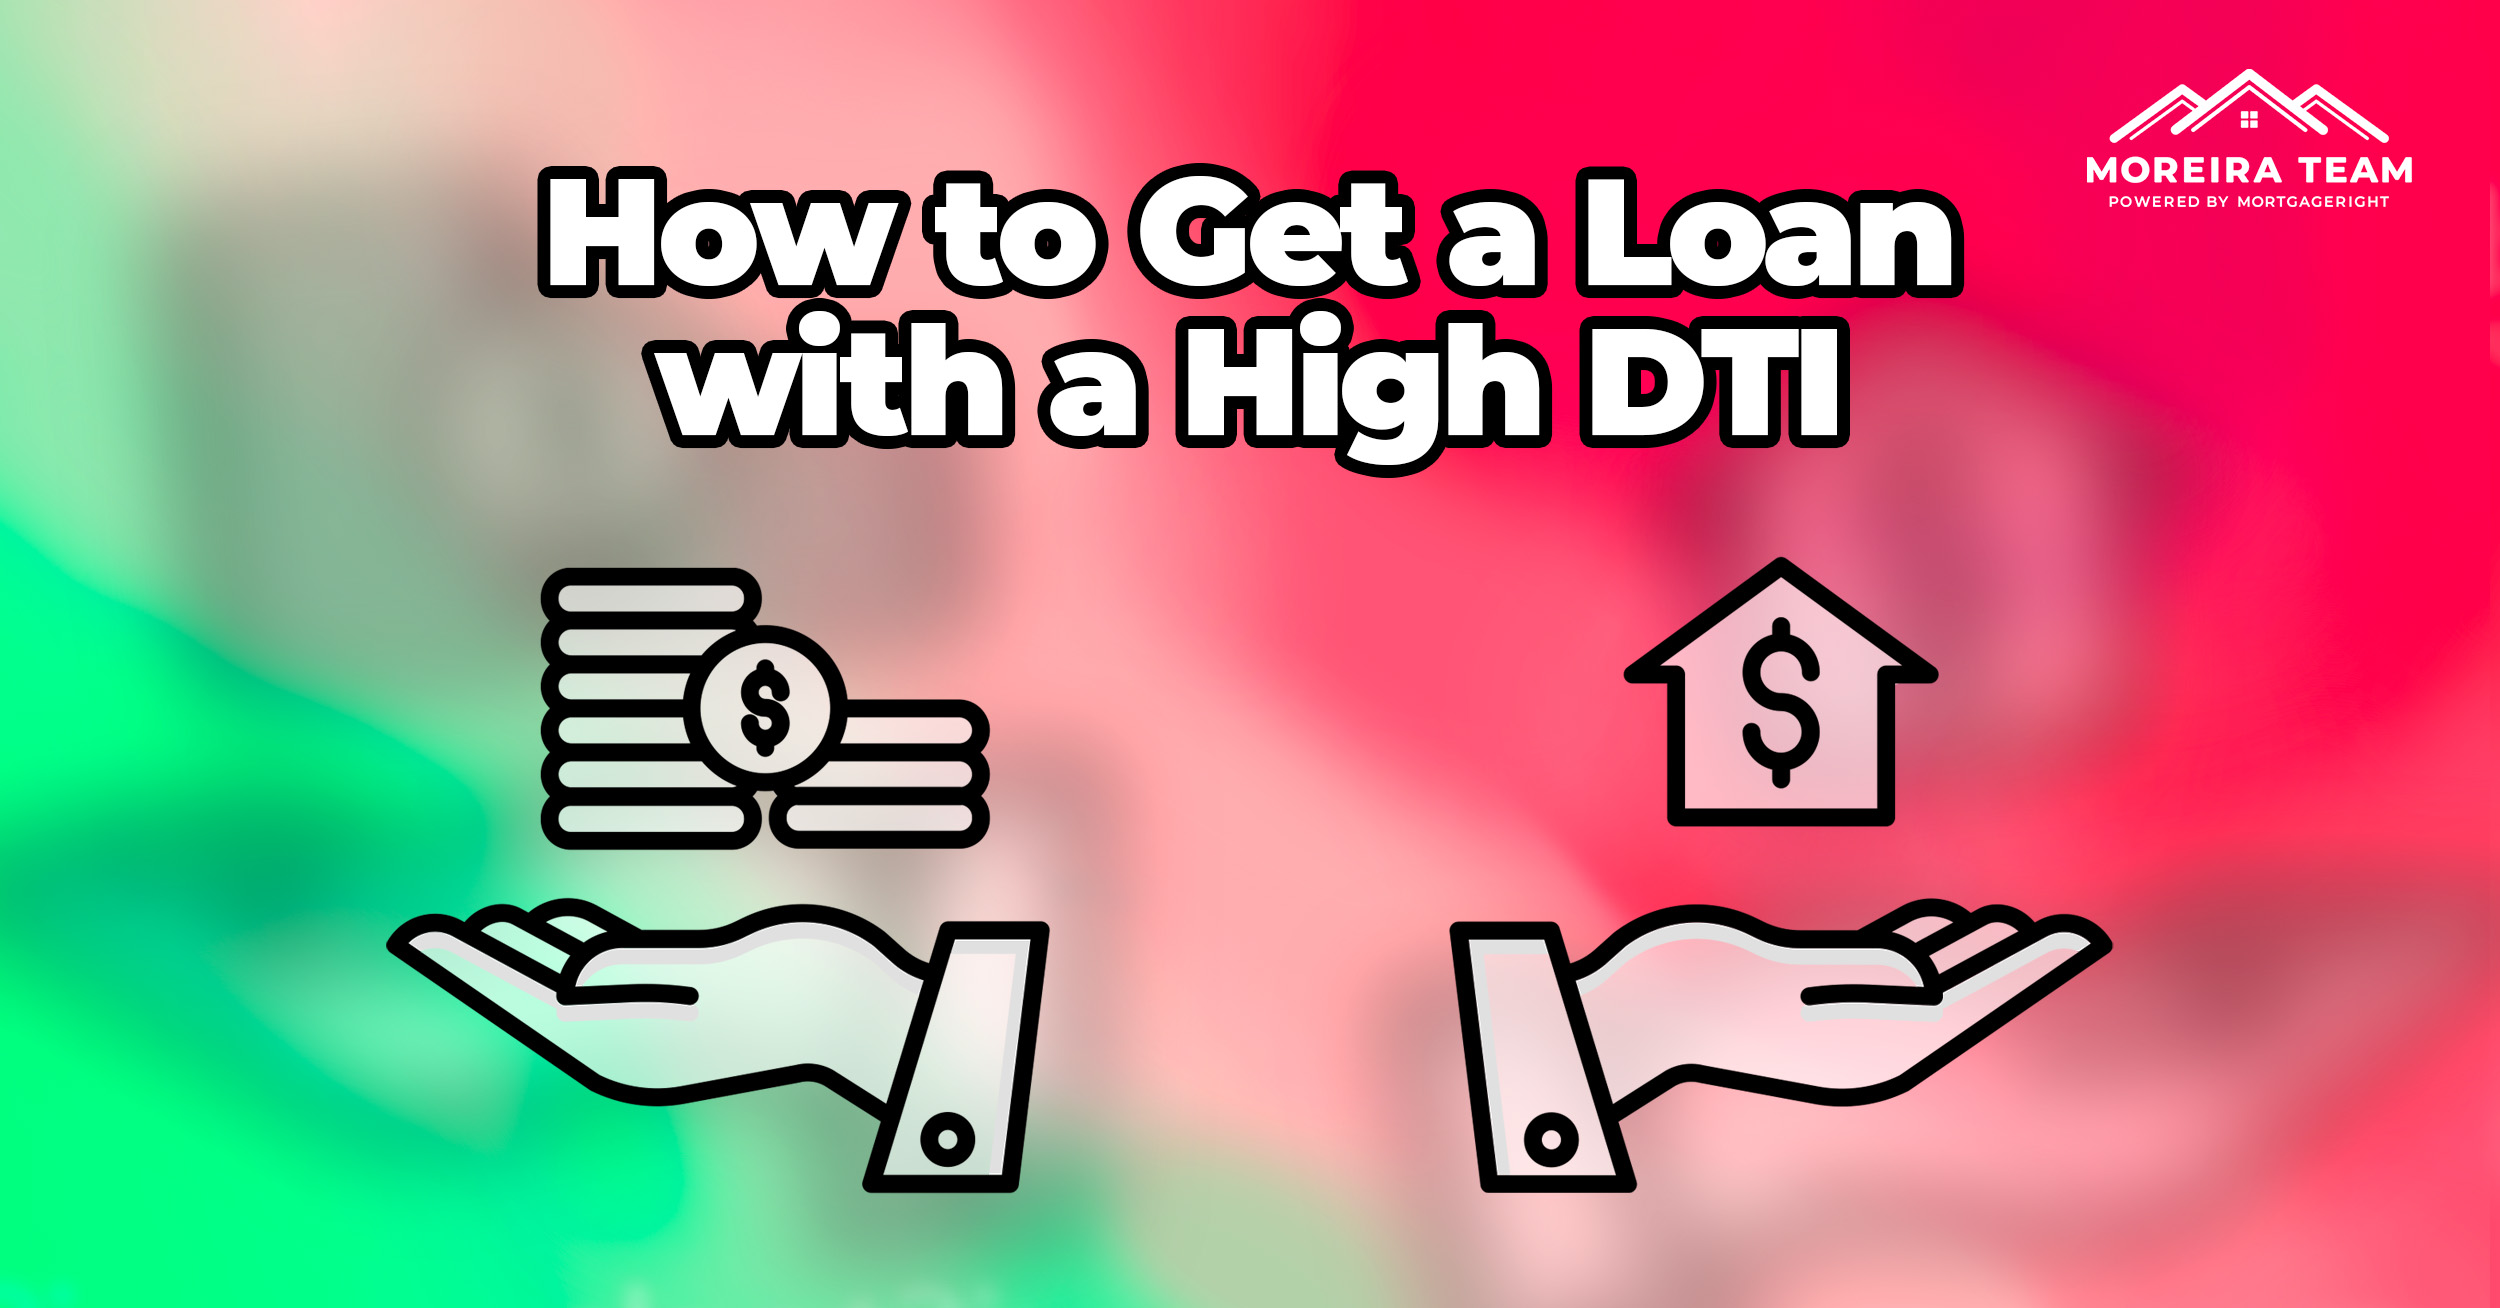 Great Advice On How to Get a Loan With a High Debt-To-Income (DTI) Ratio